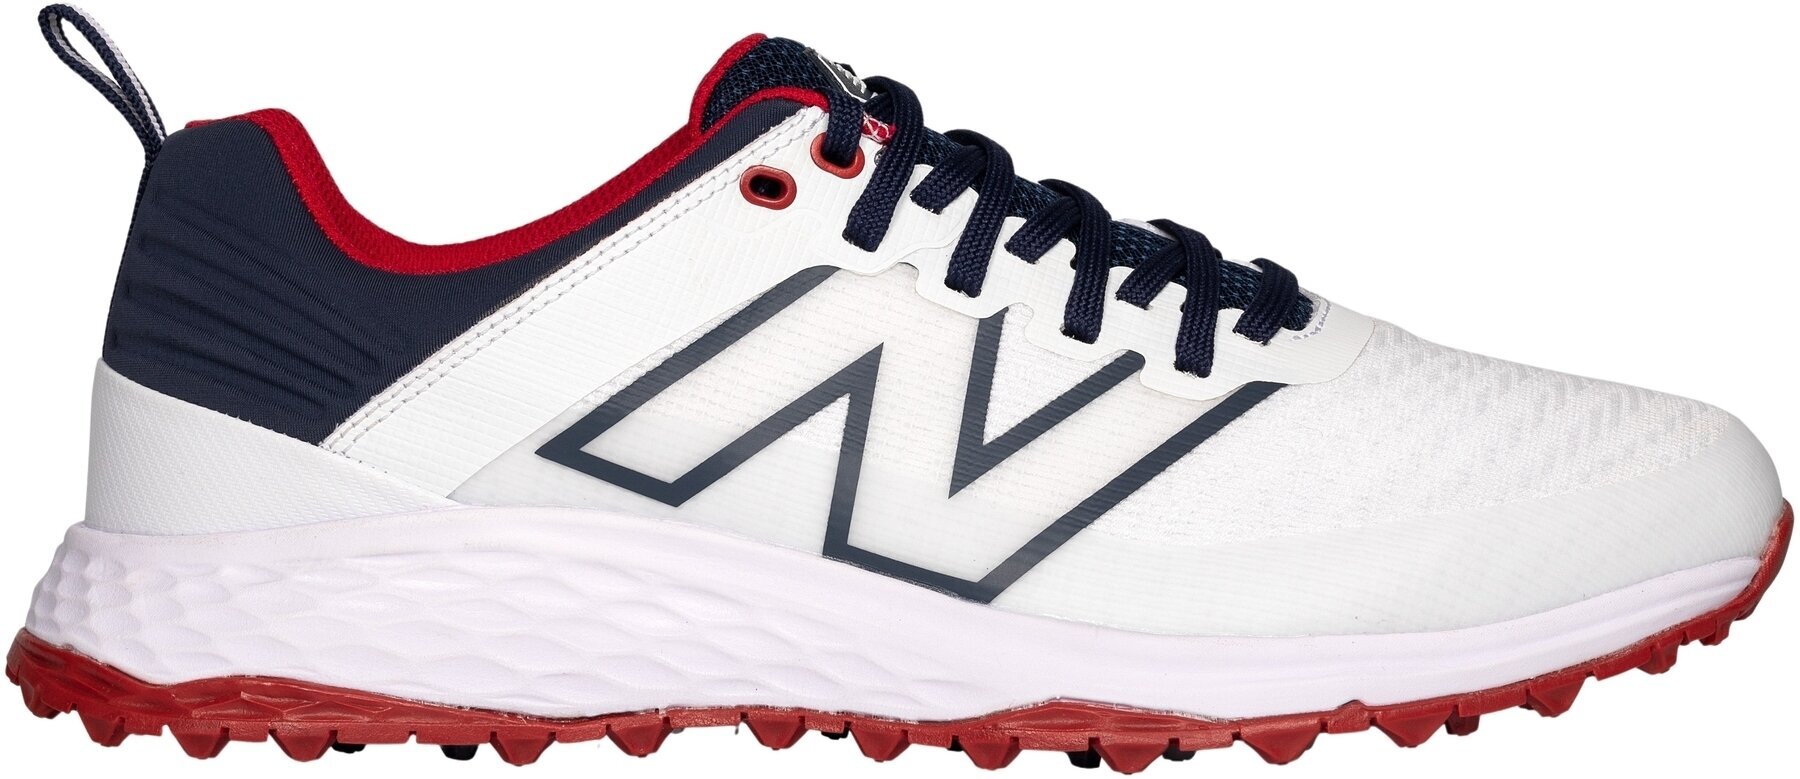 Men's golf shoes New Balance Contend Mens Golf Shoes White/Navy 43